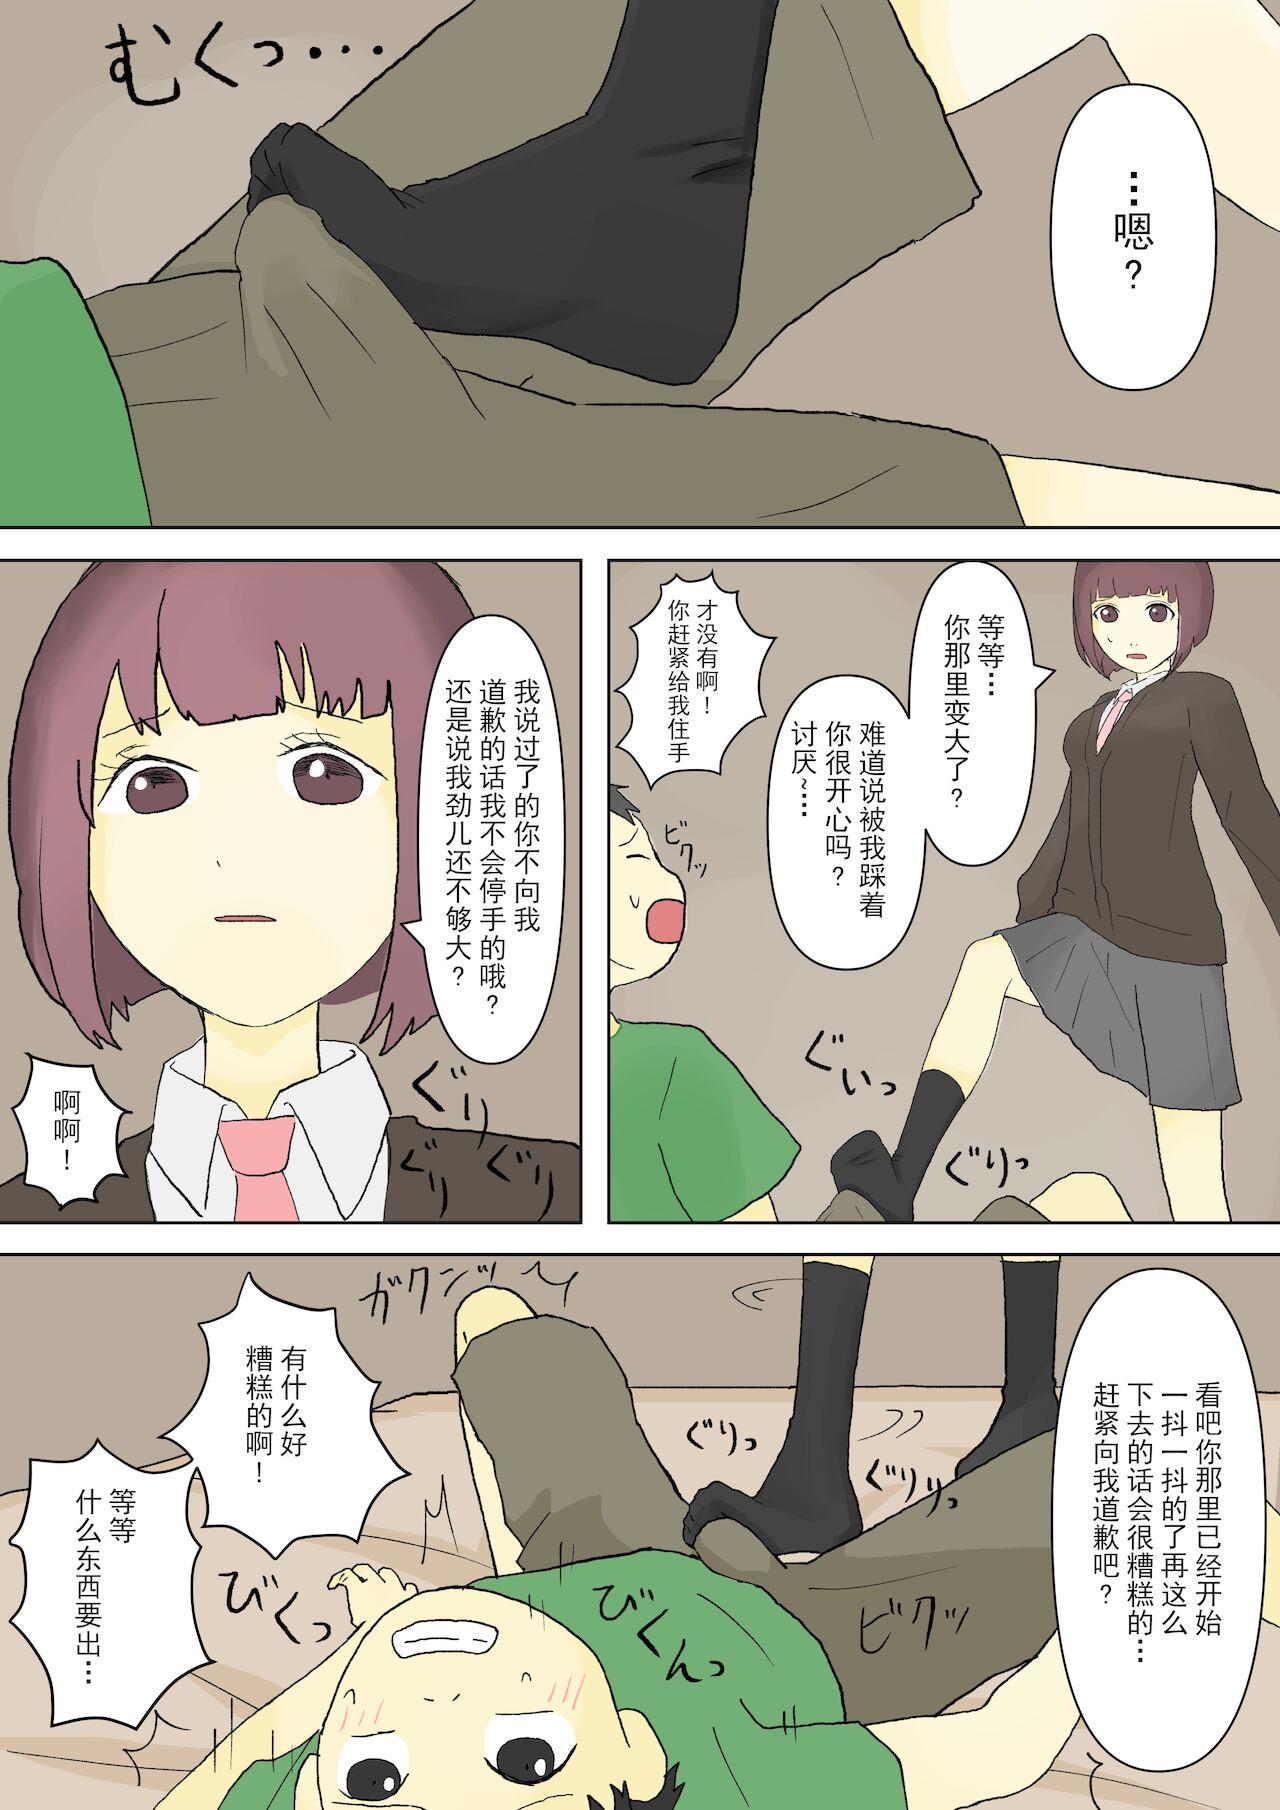 Awesome もっとその脚で僕をイジめて! Insertion - Page 6